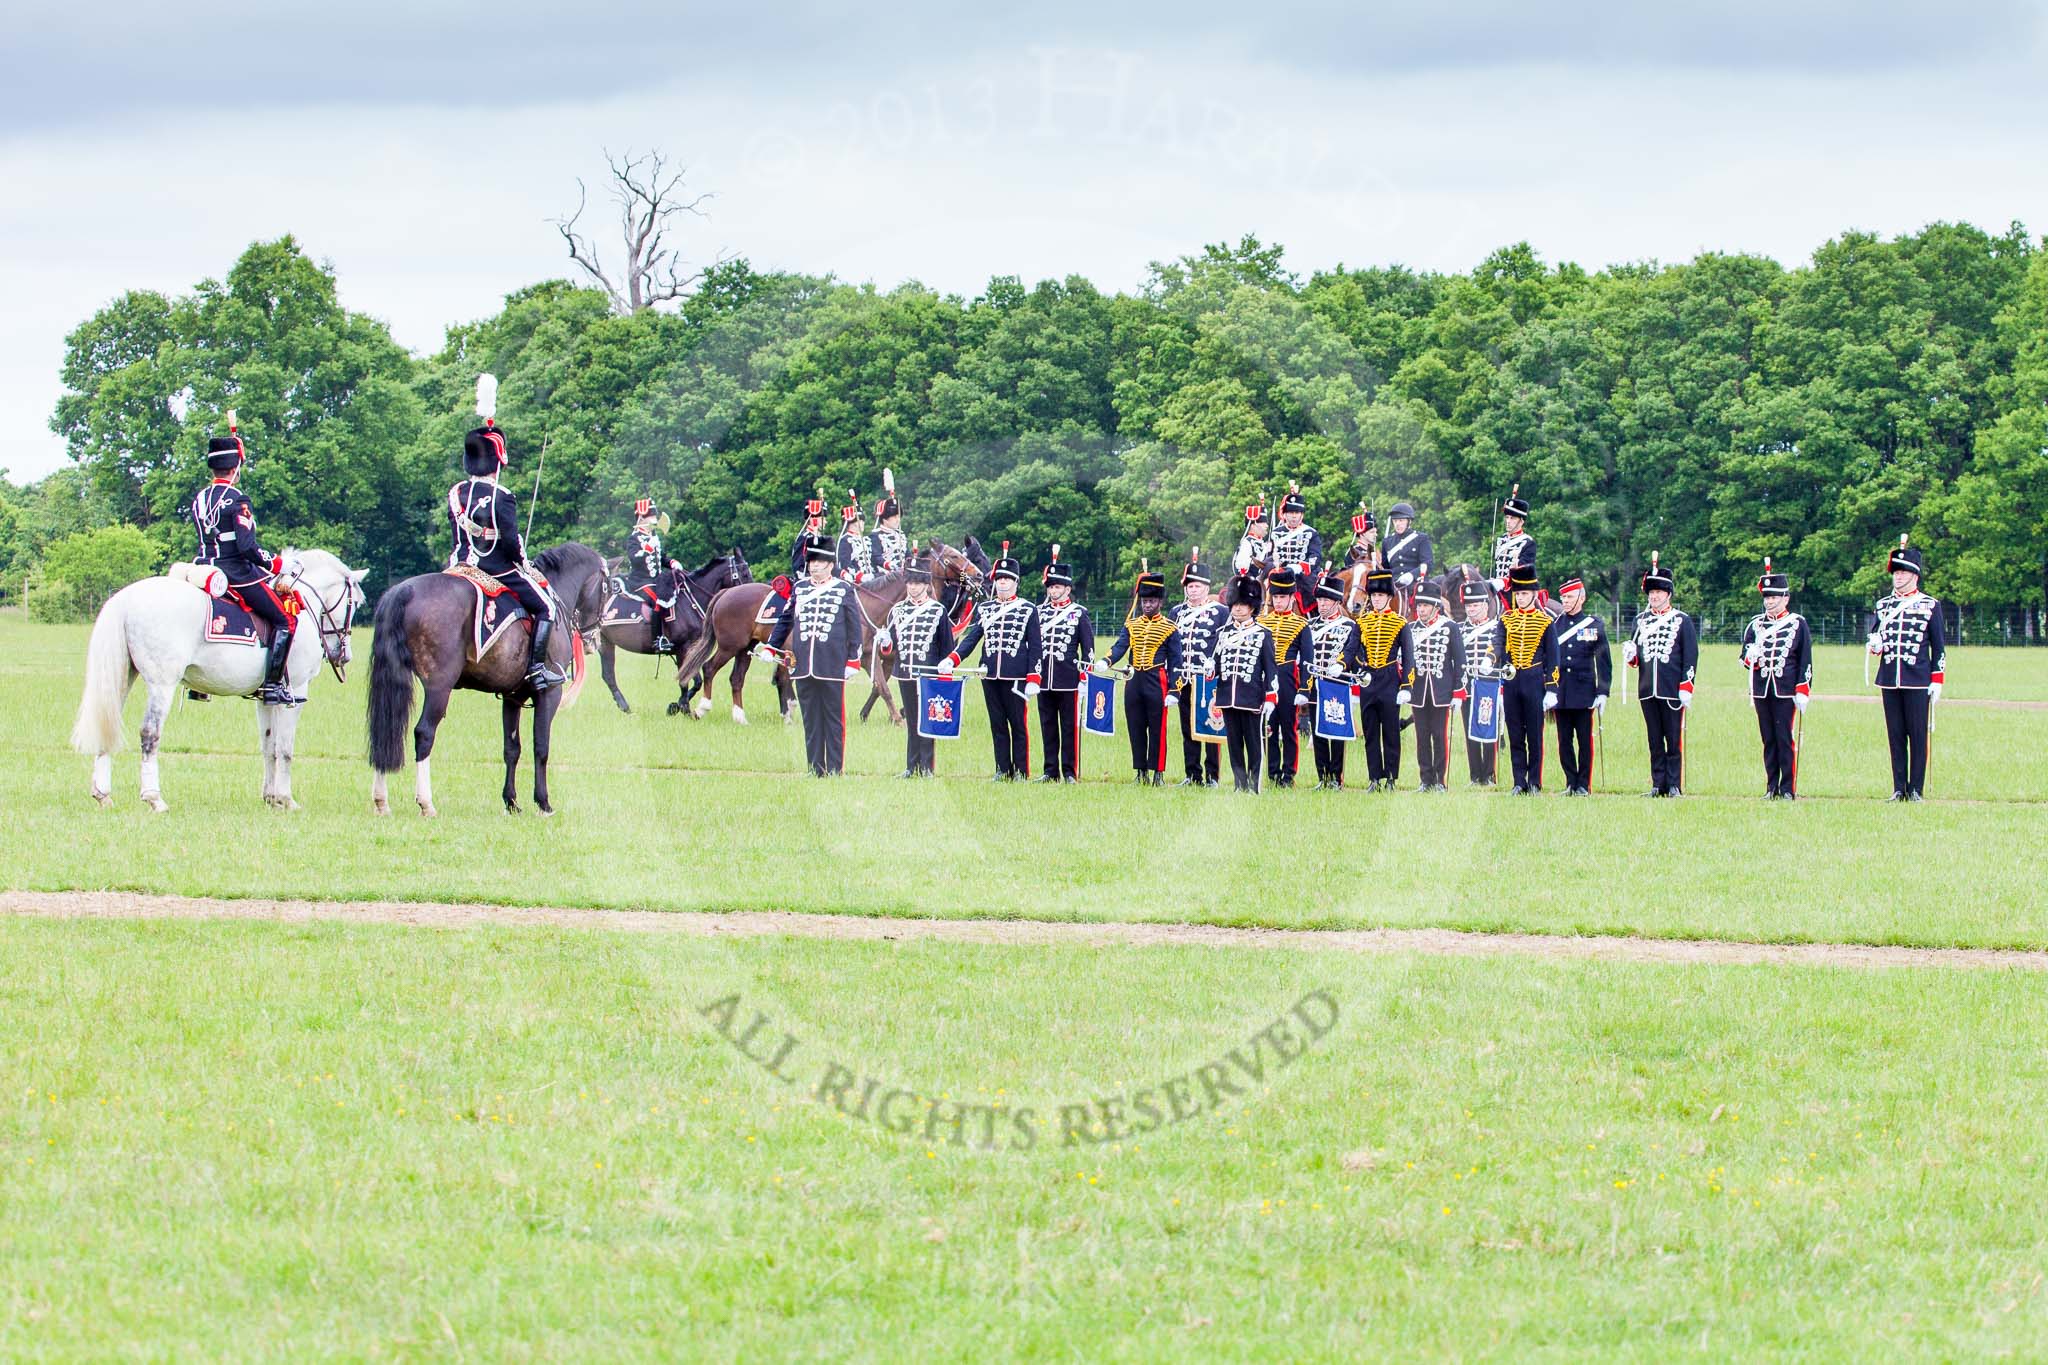 The Light Cavalry HAC Annual Review and Inspection 2013.
Windsor Great Park Review Ground,
Windsor,
Berkshire,
United Kingdom,
on 09 June 2013 at 13:38, image #469